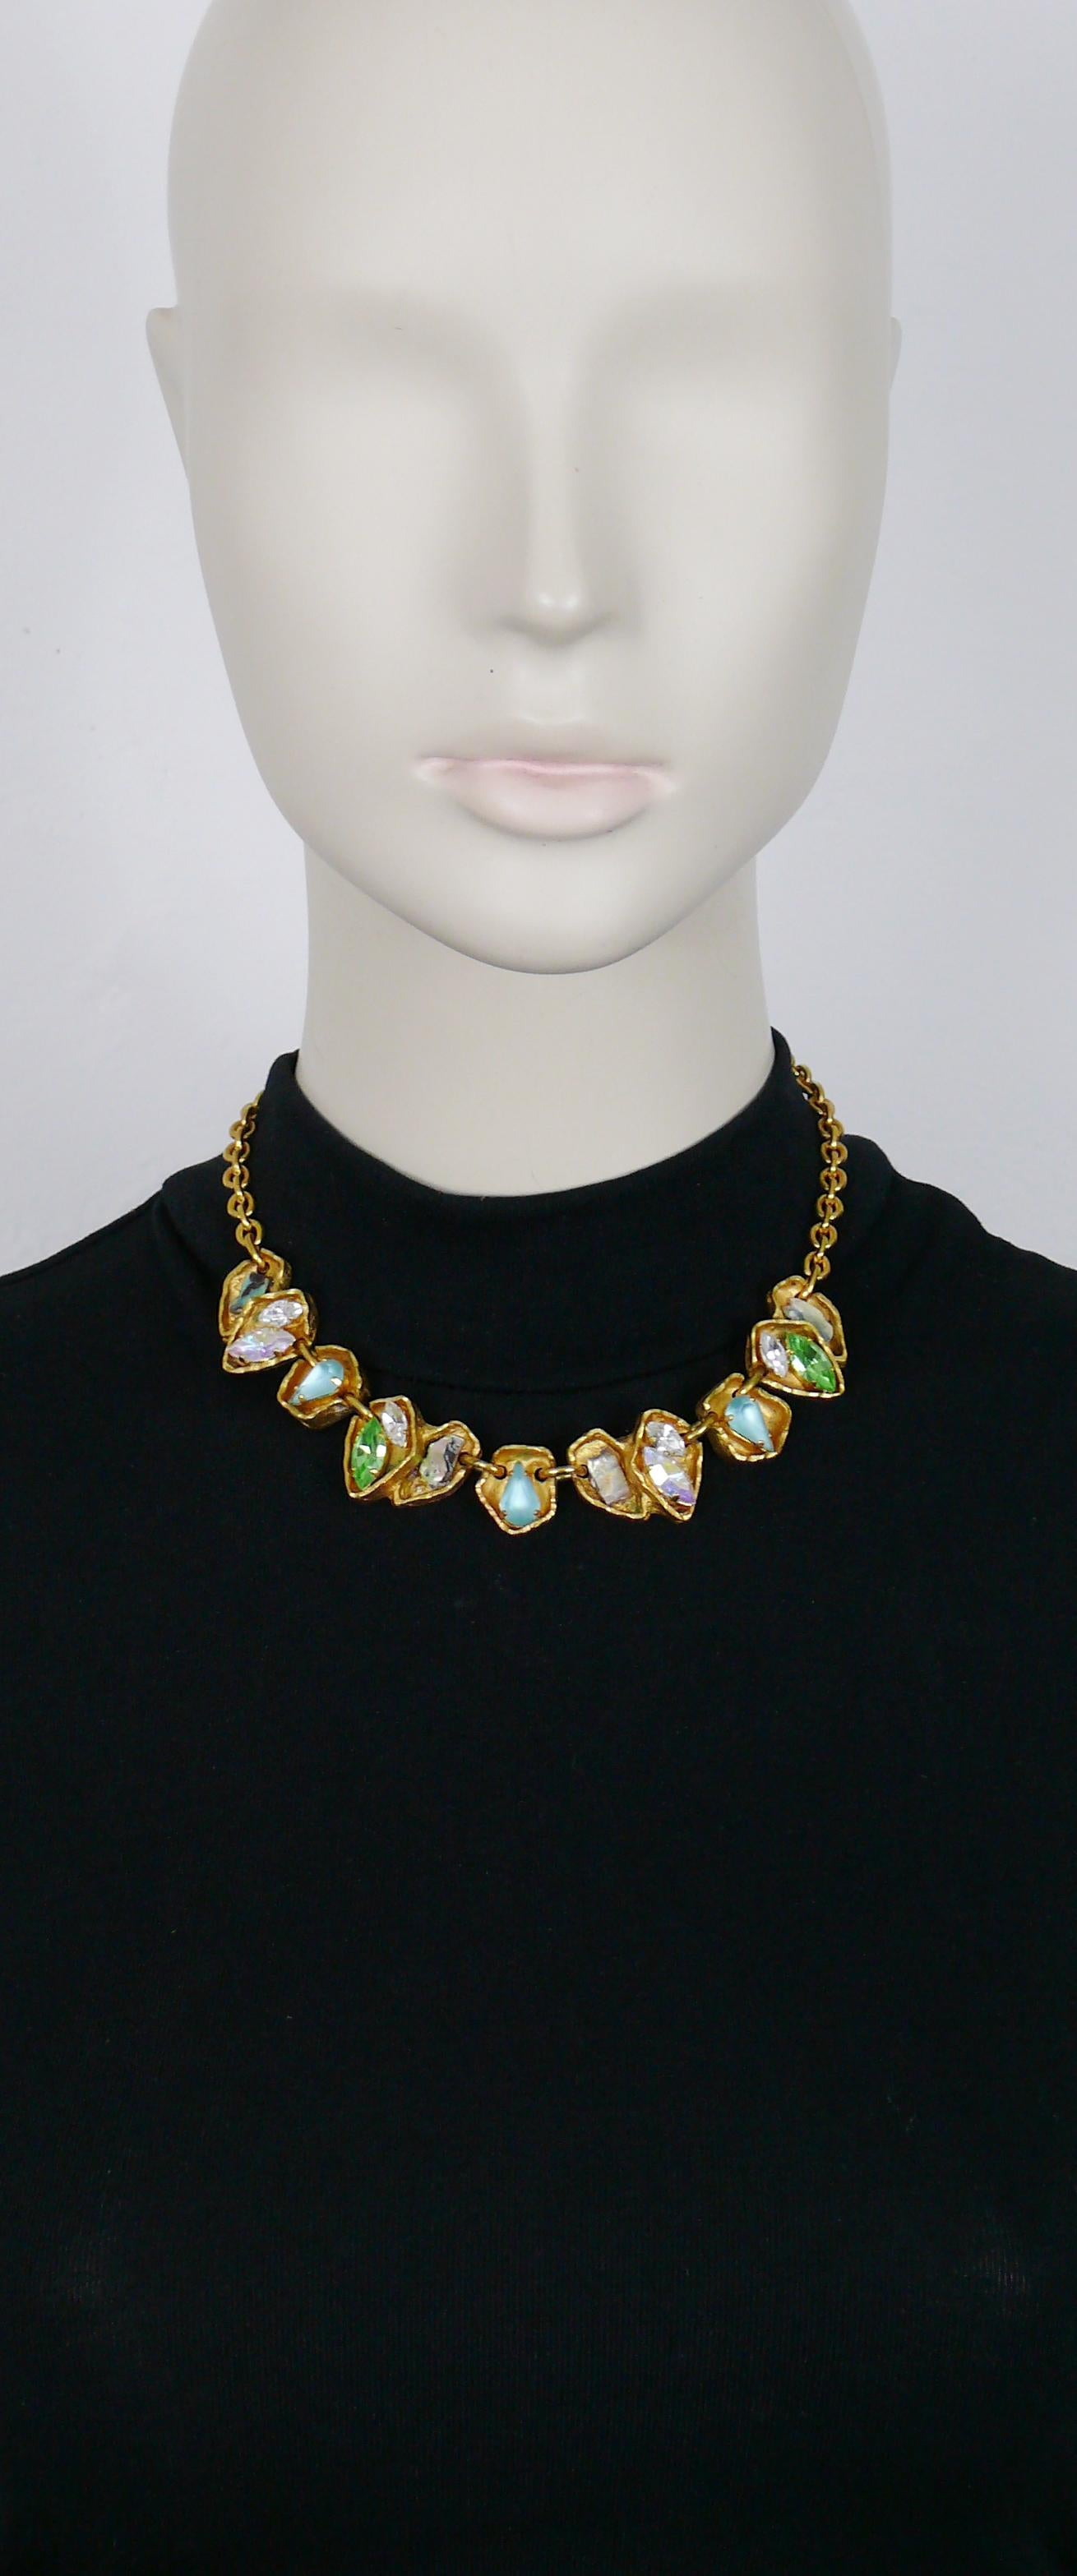 CHRISTIAN LACROIX vintage gold toned necklace featuring freeform links embellished with multicolored crystals and iridescent stones.

T-bar and toggle closure.

Marked CHRISTIAN LACROIX CL Made in France.

Indicative measurements : max. length